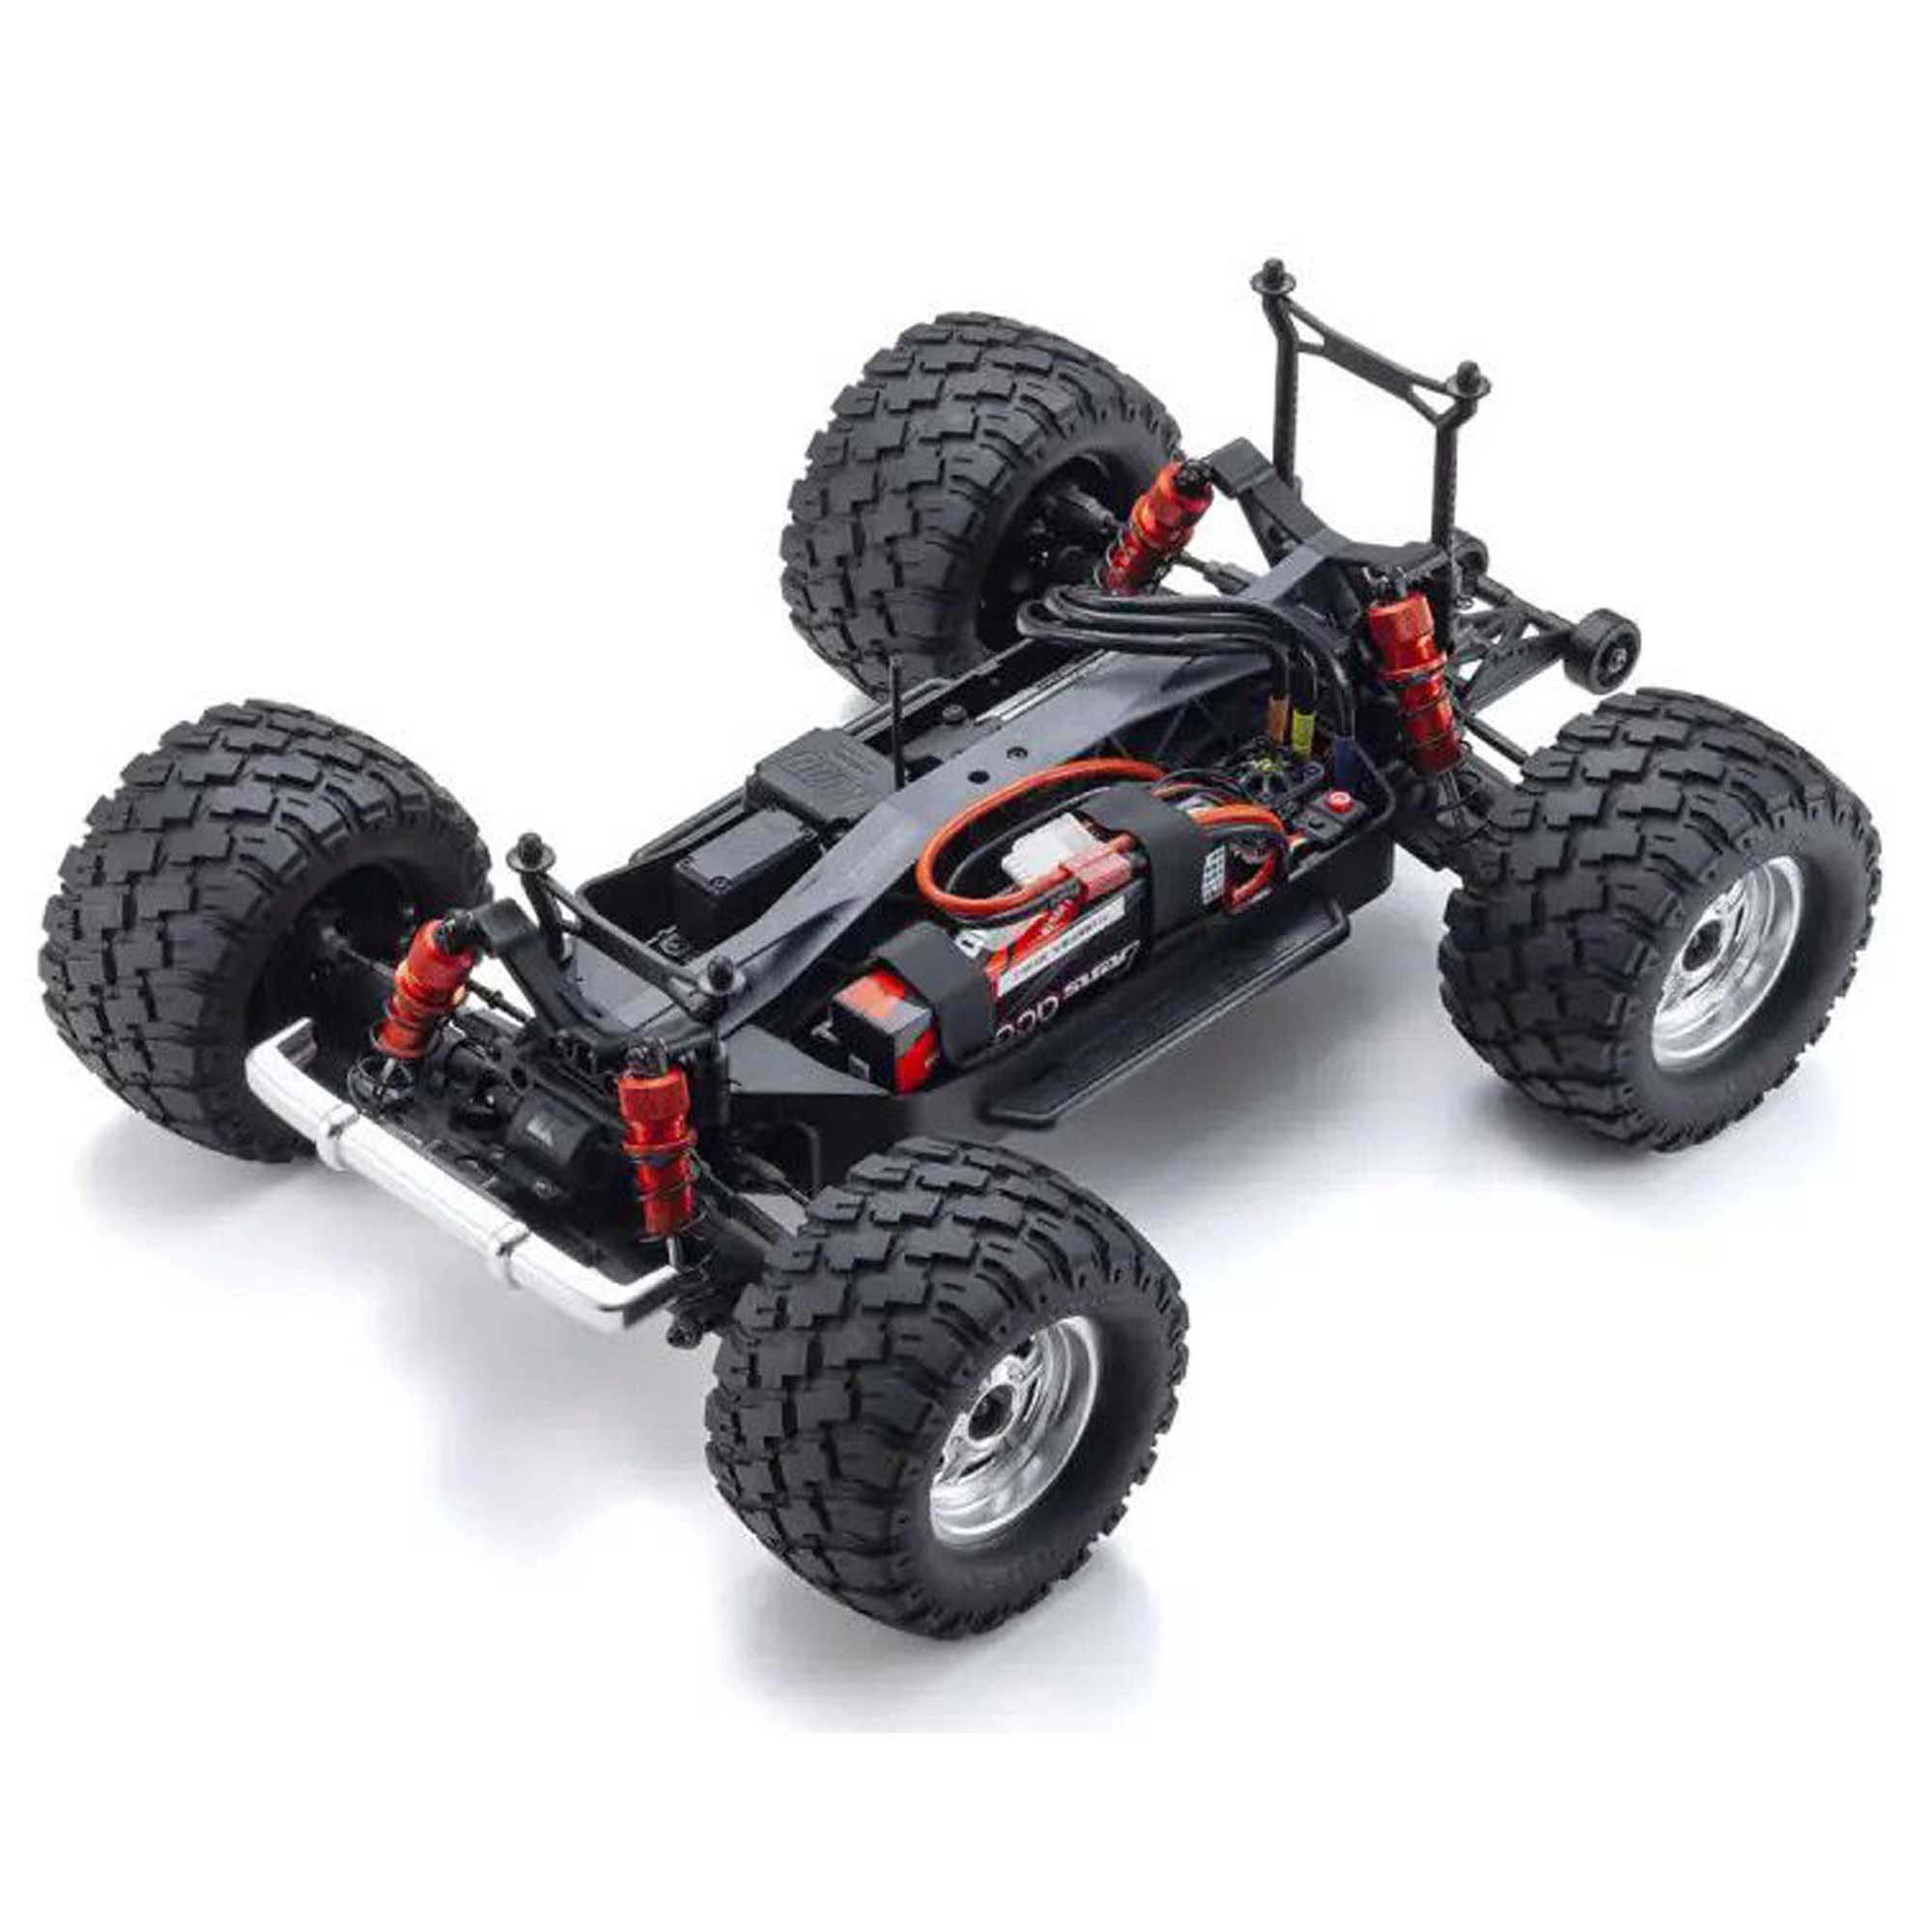 1/10 KB10 Mad Wagon 4x4 Electric Monster Truck Kit